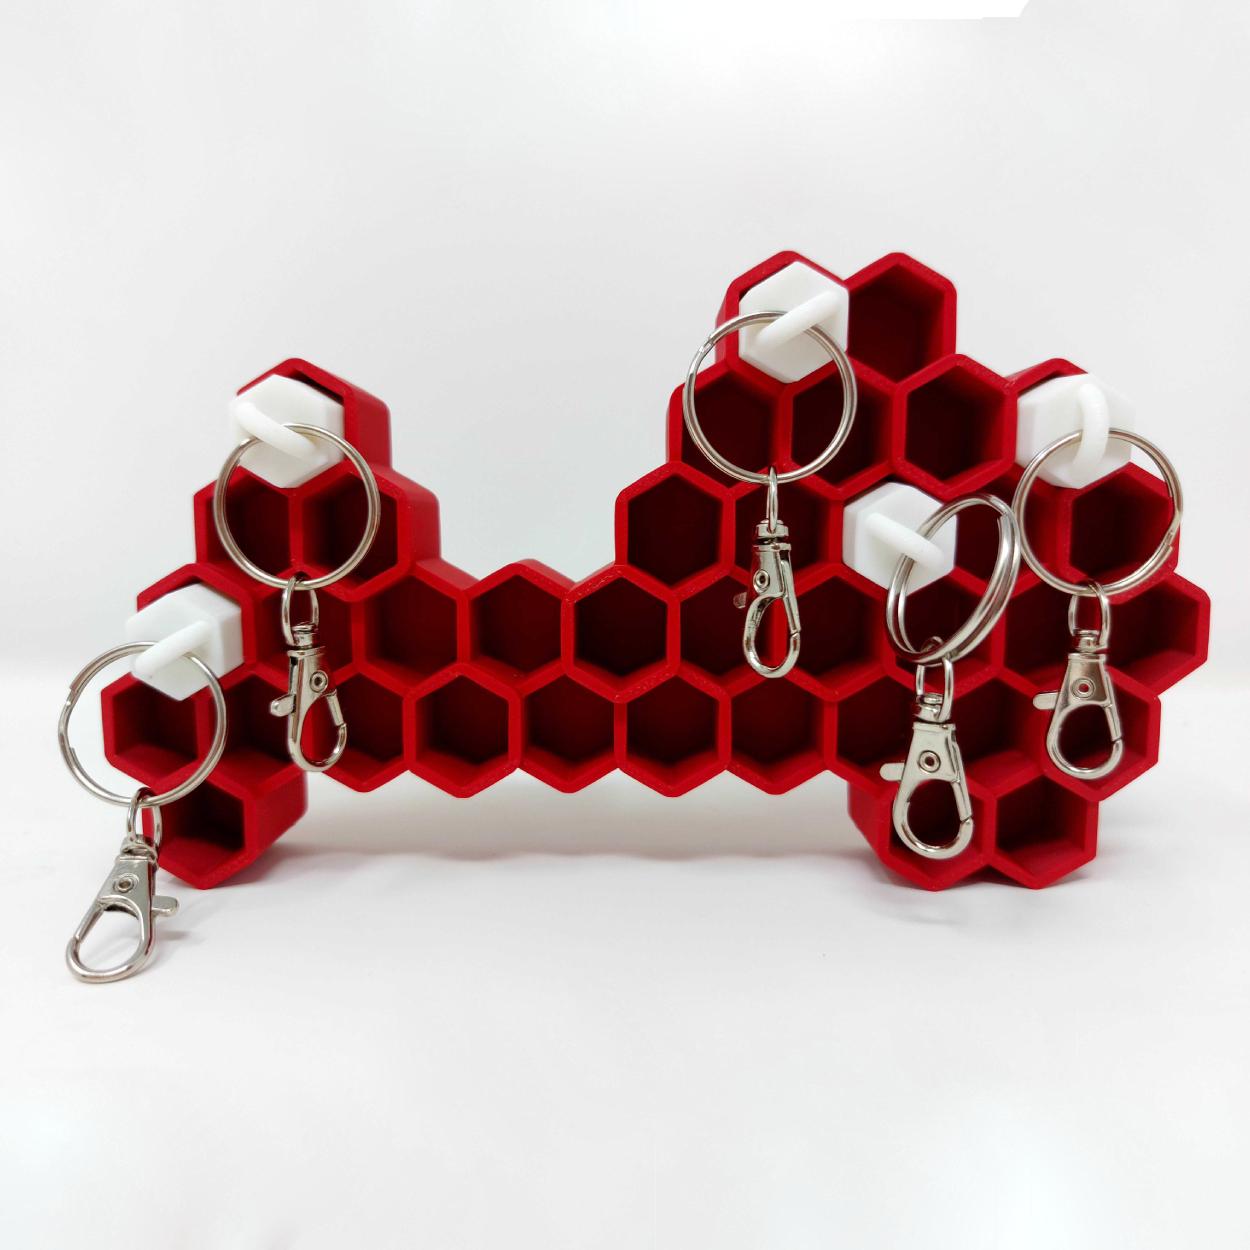 Honeycomb style wall-mounted key holder to make your home more special